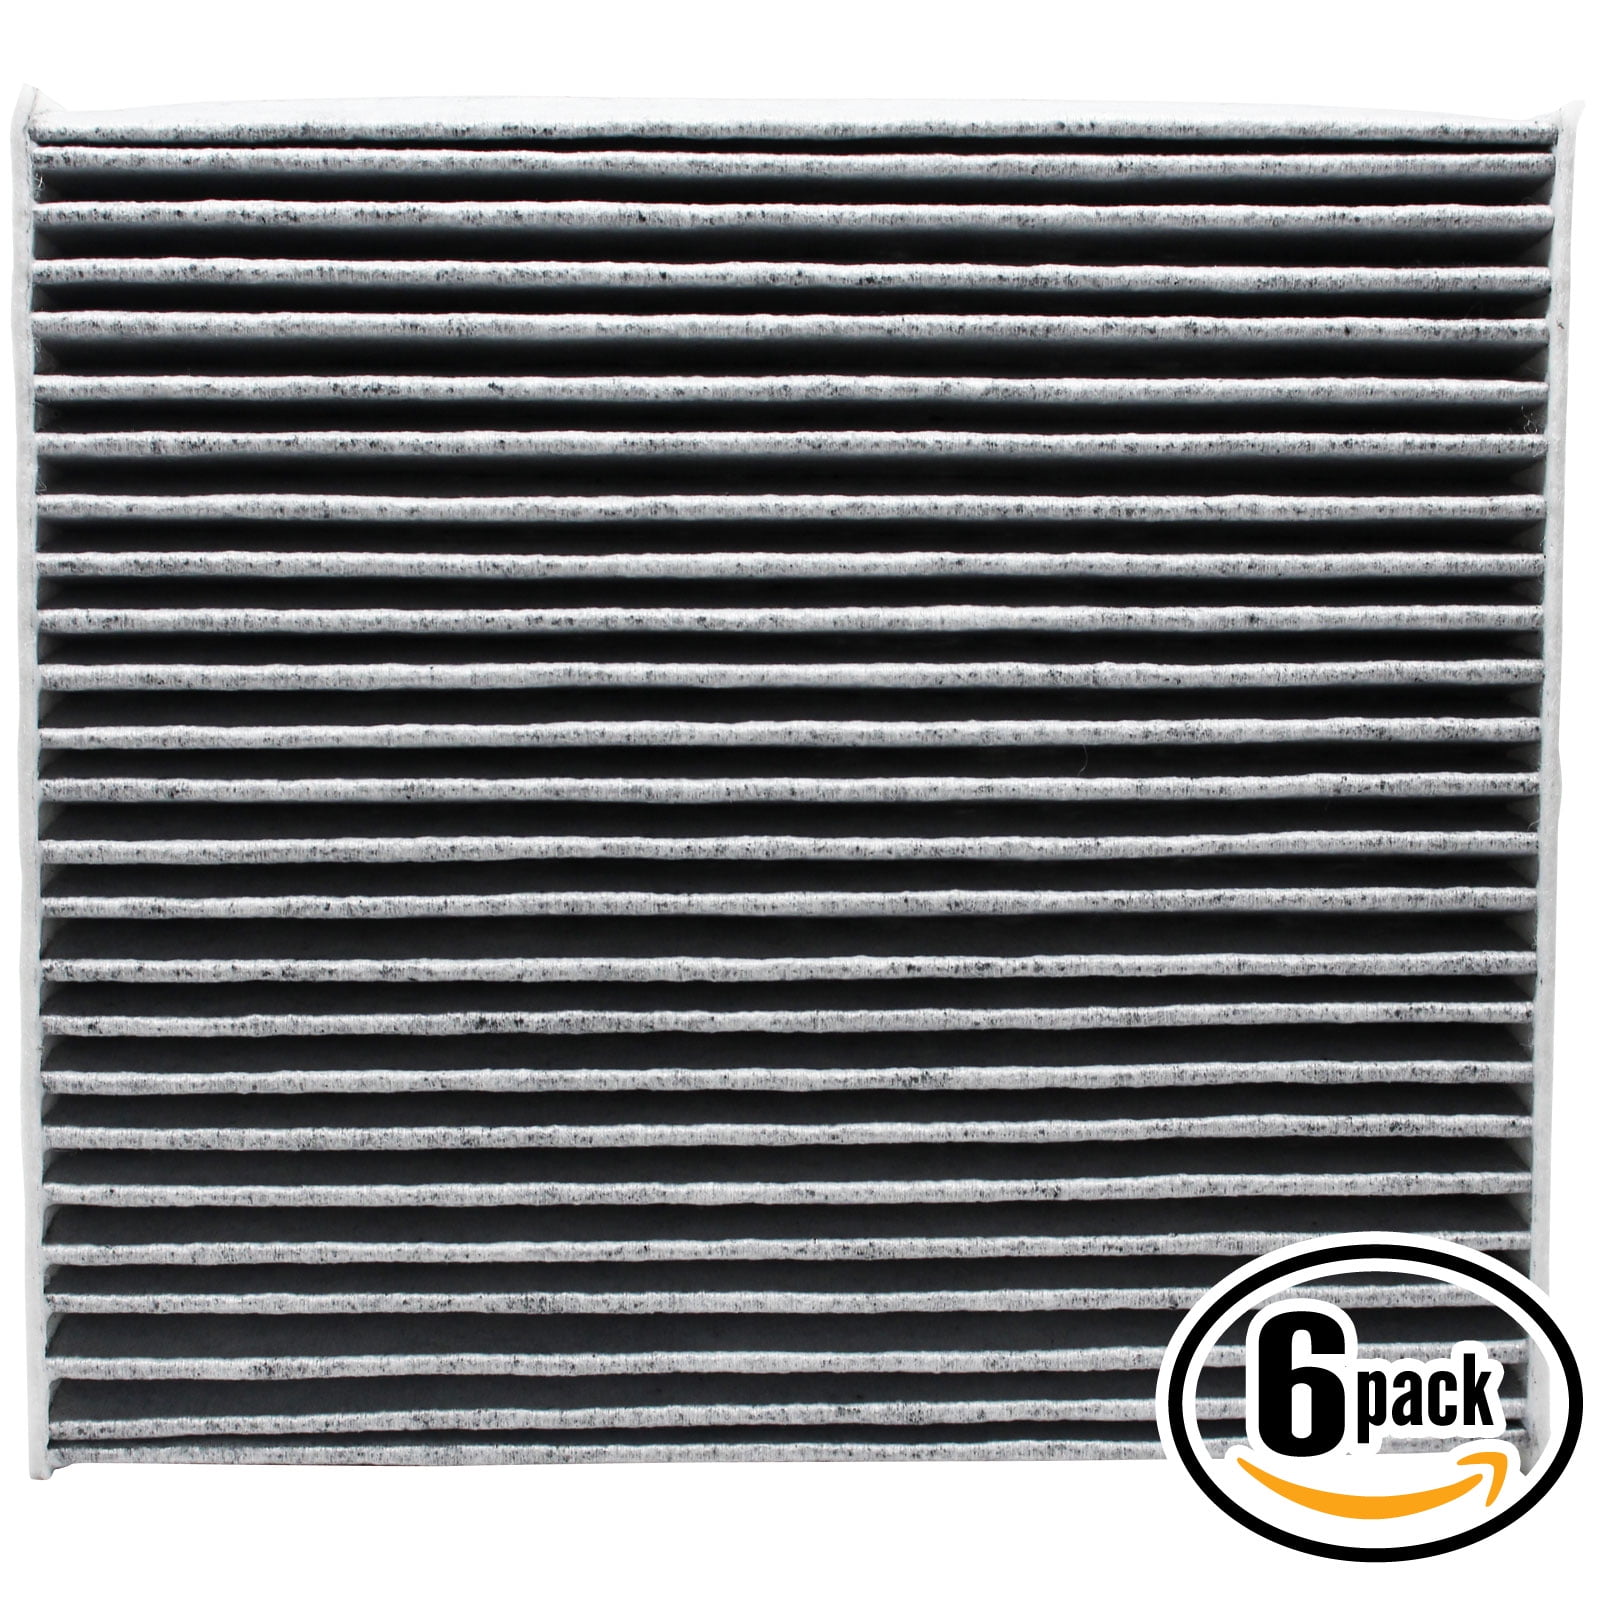 6-Pack Replacement Cabin Air Filter for 2015 Toyota CAMRY L4 2.5L 2494cc Car/Automotive Cabin Air Filter For 2015 Toyota Camry